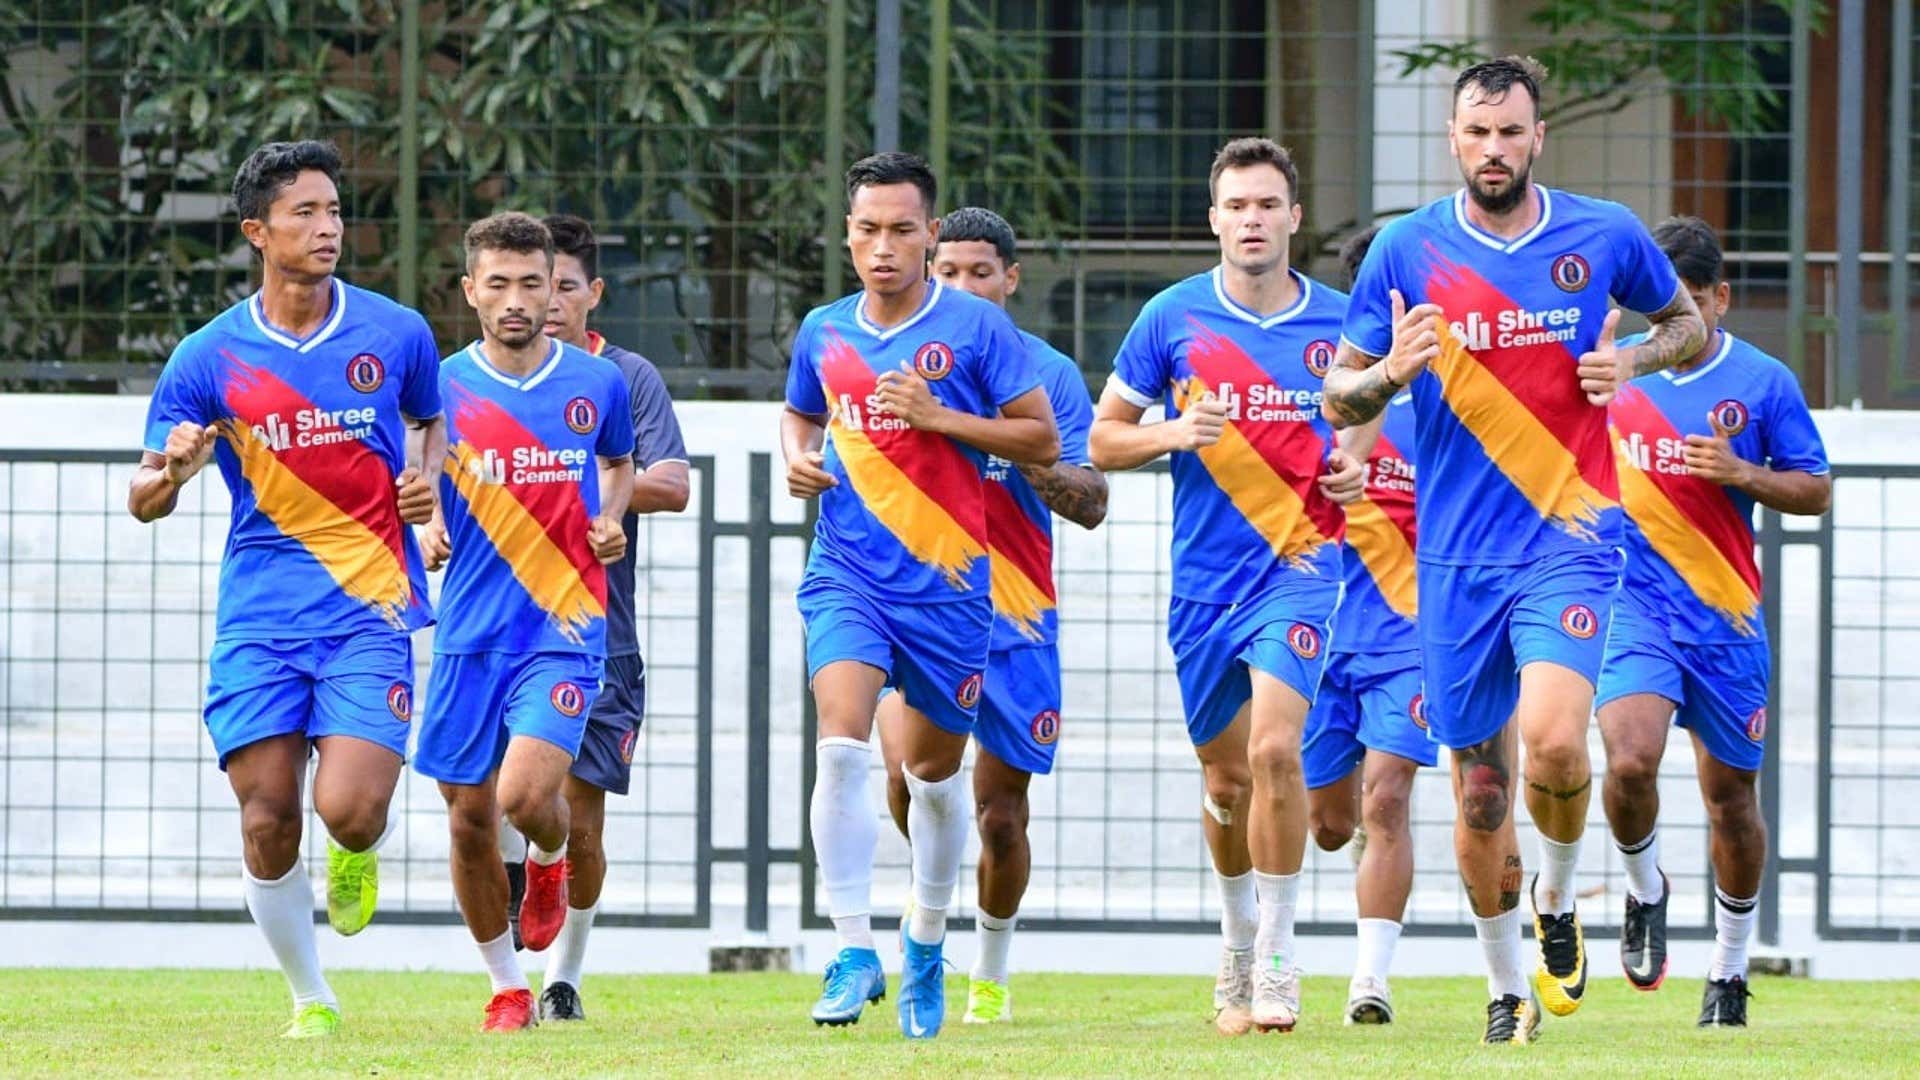 ISL 2021-22: East Bengal – Squad, Fixtures, Strengths, Weakness, & Key Players